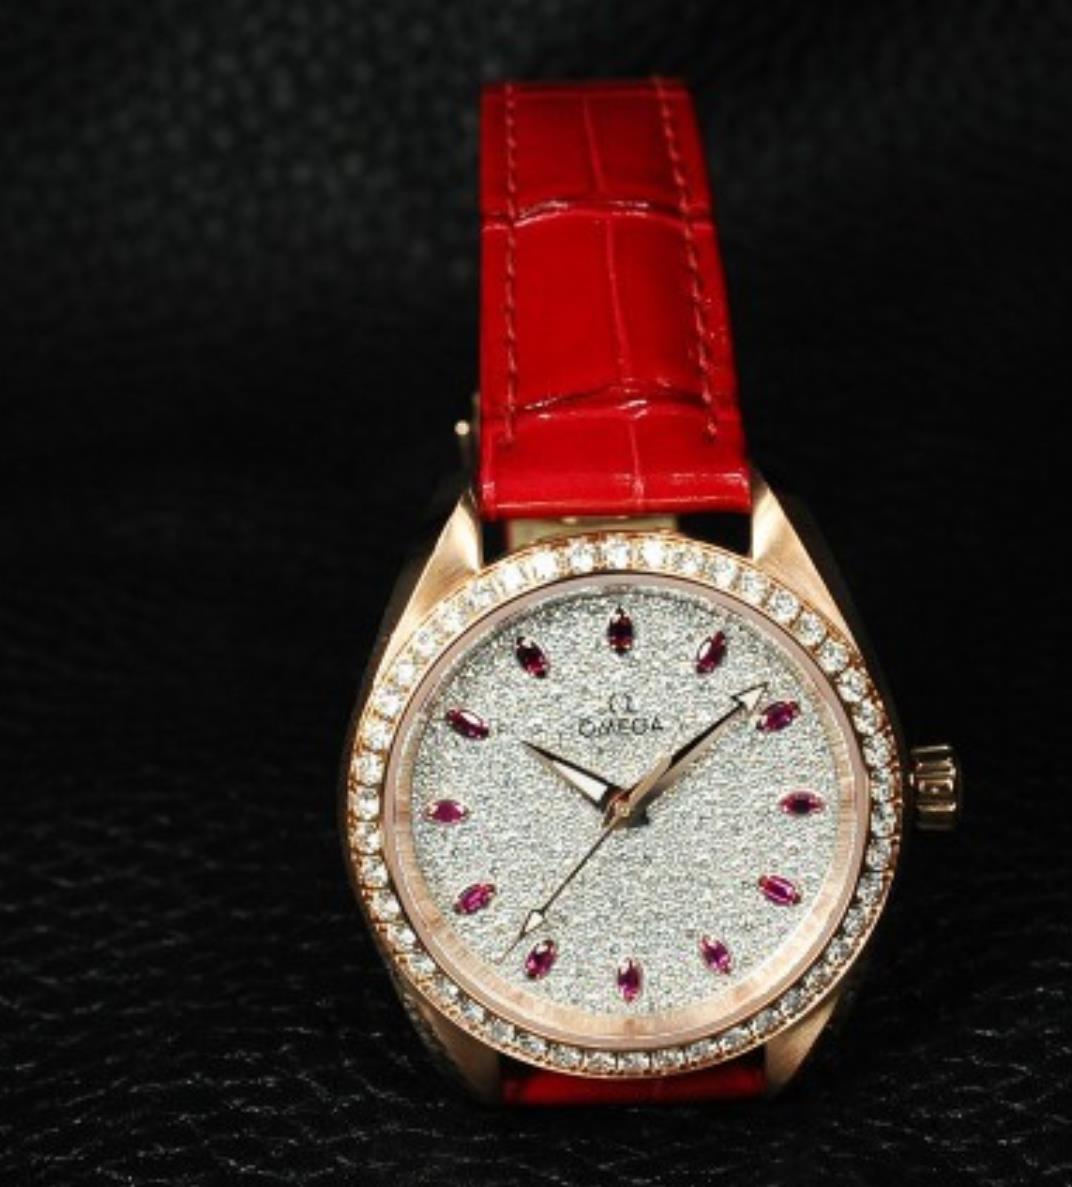 The diamond-paved dial fake watch is designed for women.